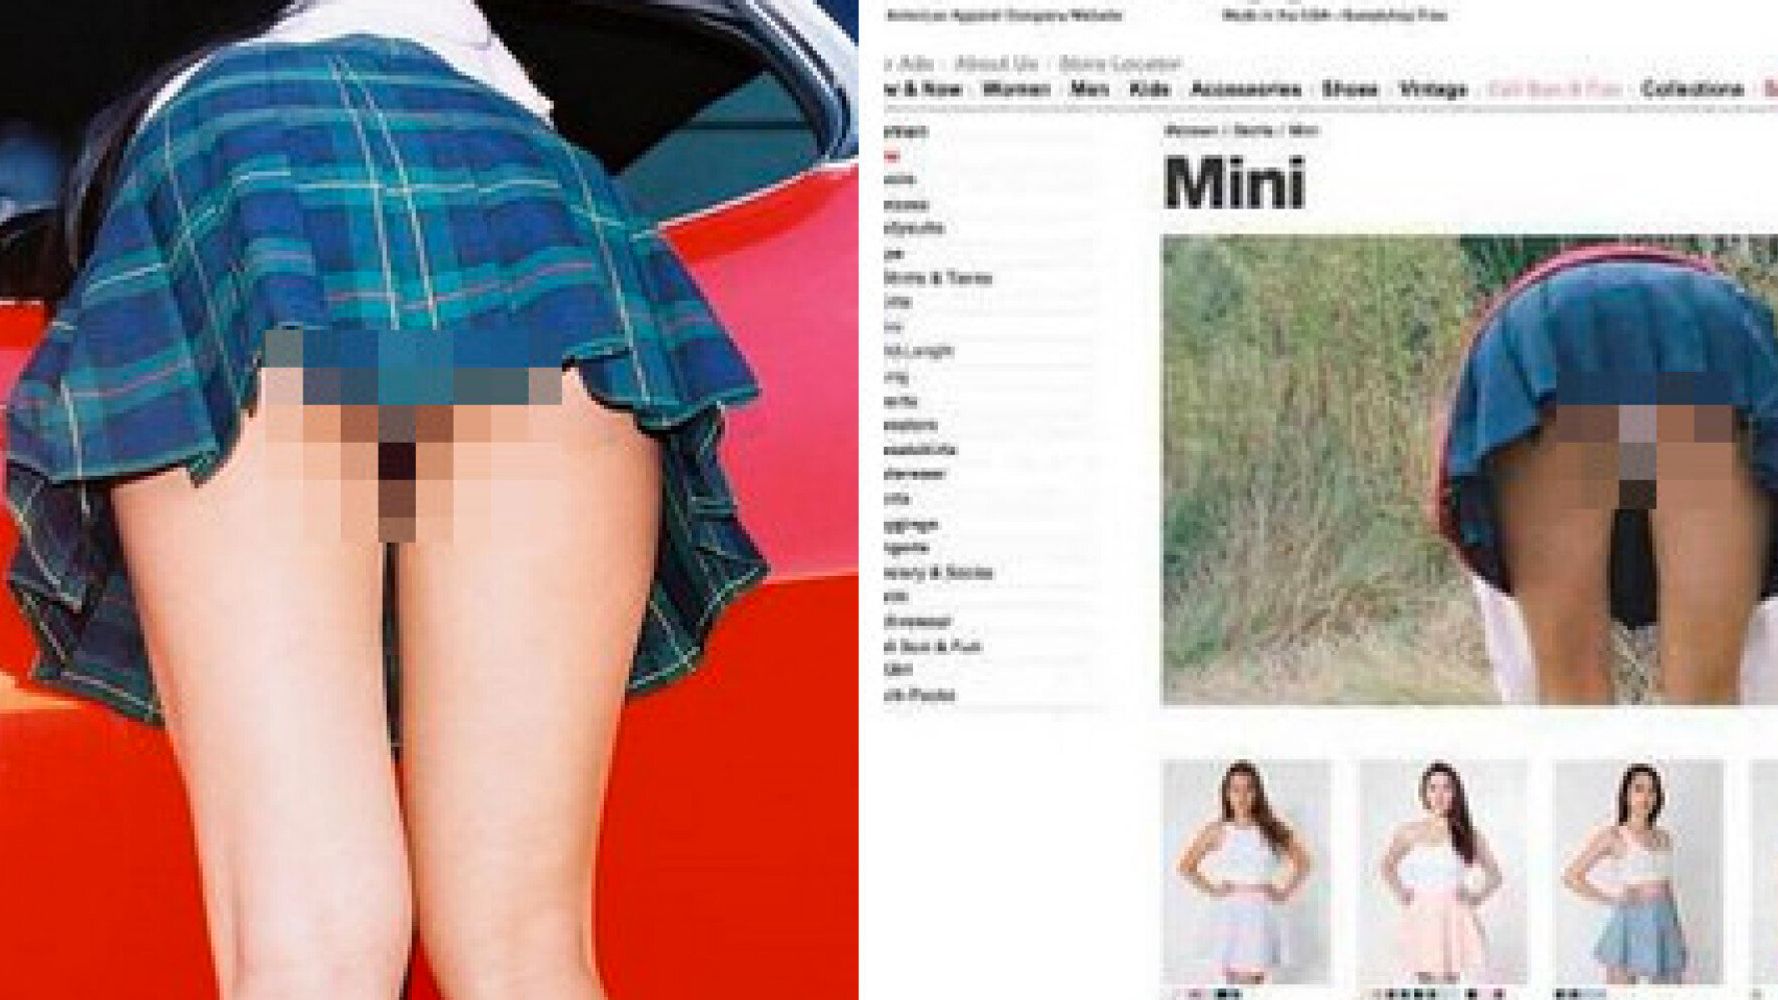 American Apparel 'Sexy School Girl' Skirt Image Labelled ...